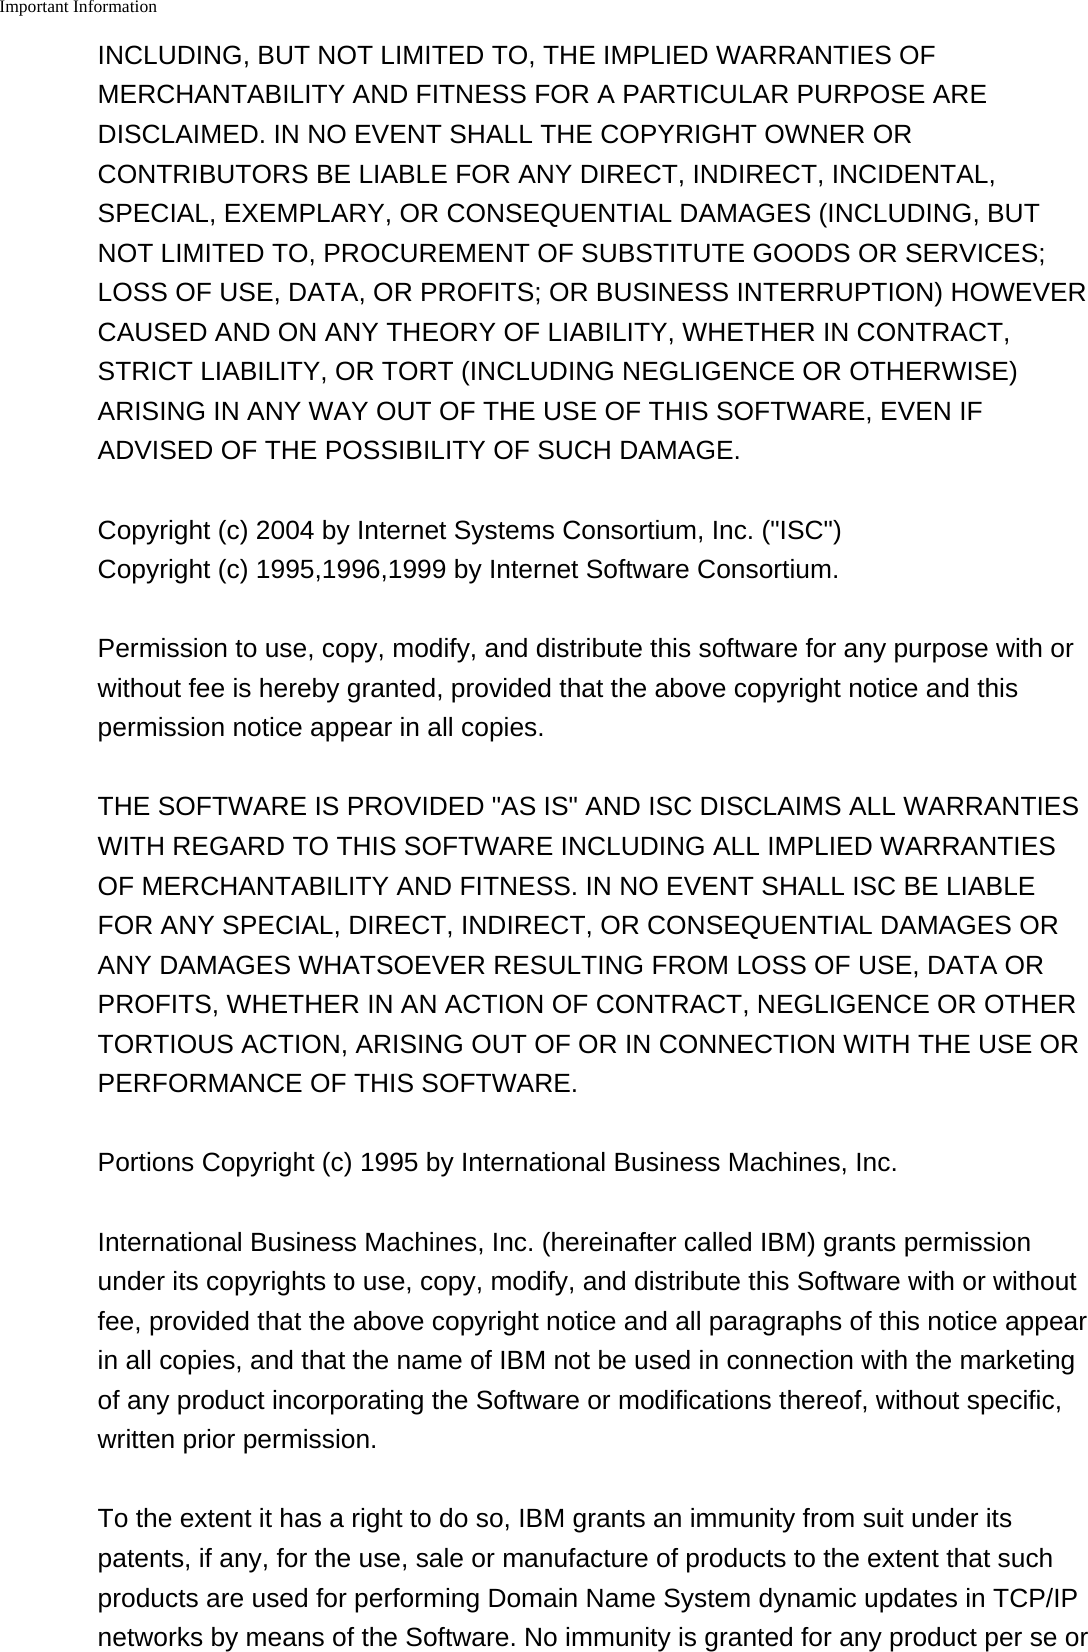 Important Information    INCLUDING, BUT NOT LIMITED TO, THE IMPLIED WARRANTIES OFMERCHANTABILITY AND FITNESS FOR A PARTICULAR PURPOSE AREDISCLAIMED. IN NO EVENT SHALL THE COPYRIGHT OWNER ORCONTRIBUTORS BE LIABLE FOR ANY DIRECT, INDIRECT, INCIDENTAL,SPECIAL, EXEMPLARY, OR CONSEQUENTIAL DAMAGES (INCLUDING, BUTNOT LIMITED TO, PROCUREMENT OF SUBSTITUTE GOODS OR SERVICES;LOSS OF USE, DATA, OR PROFITS; OR BUSINESS INTERRUPTION) HOWEVERCAUSED AND ON ANY THEORY OF LIABILITY, WHETHER IN CONTRACT,STRICT LIABILITY, OR TORT (INCLUDING NEGLIGENCE OR OTHERWISE)ARISING IN ANY WAY OUT OF THE USE OF THIS SOFTWARE, EVEN IFADVISED OF THE POSSIBILITY OF SUCH DAMAGE.Copyright (c) 2004 by Internet Systems Consortium, Inc. (&quot;ISC&quot;) Copyright (c) 1995,1996,1999 by Internet Software Consortium.Permission to use, copy, modify, and distribute this software for any purpose with orwithout fee is hereby granted, provided that the above copyright notice and thispermission notice appear in all copies.THE SOFTWARE IS PROVIDED &quot;AS IS&quot; AND ISC DISCLAIMS ALL WARRANTIESWITH REGARD TO THIS SOFTWARE INCLUDING ALL IMPLIED WARRANTIESOF MERCHANTABILITY AND FITNESS. IN NO EVENT SHALL ISC BE LIABLEFOR ANY SPECIAL, DIRECT, INDIRECT, OR CONSEQUENTIAL DAMAGES ORANY DAMAGES WHATSOEVER RESULTING FROM LOSS OF USE, DATA ORPROFITS, WHETHER IN AN ACTION OF CONTRACT, NEGLIGENCE OR OTHERTORTIOUS ACTION, ARISING OUT OF OR IN CONNECTION WITH THE USE ORPERFORMANCE OF THIS SOFTWARE.Portions Copyright (c) 1995 by International Business Machines, Inc.International Business Machines, Inc. (hereinafter called IBM) grants permissionunder its copyrights to use, copy, modify, and distribute this Software with or withoutfee, provided that the above copyright notice and all paragraphs of this notice appearin all copies, and that the name of IBM not be used in connection with the marketingof any product incorporating the Software or modifications thereof, without specific,written prior permission.To the extent it has a right to do so, IBM grants an immunity from suit under itspatents, if any, for the use, sale or manufacture of products to the extent that suchproducts are used for performing Domain Name System dynamic updates in TCP/IPnetworks by means of the Software. No immunity is granted for any product per se or